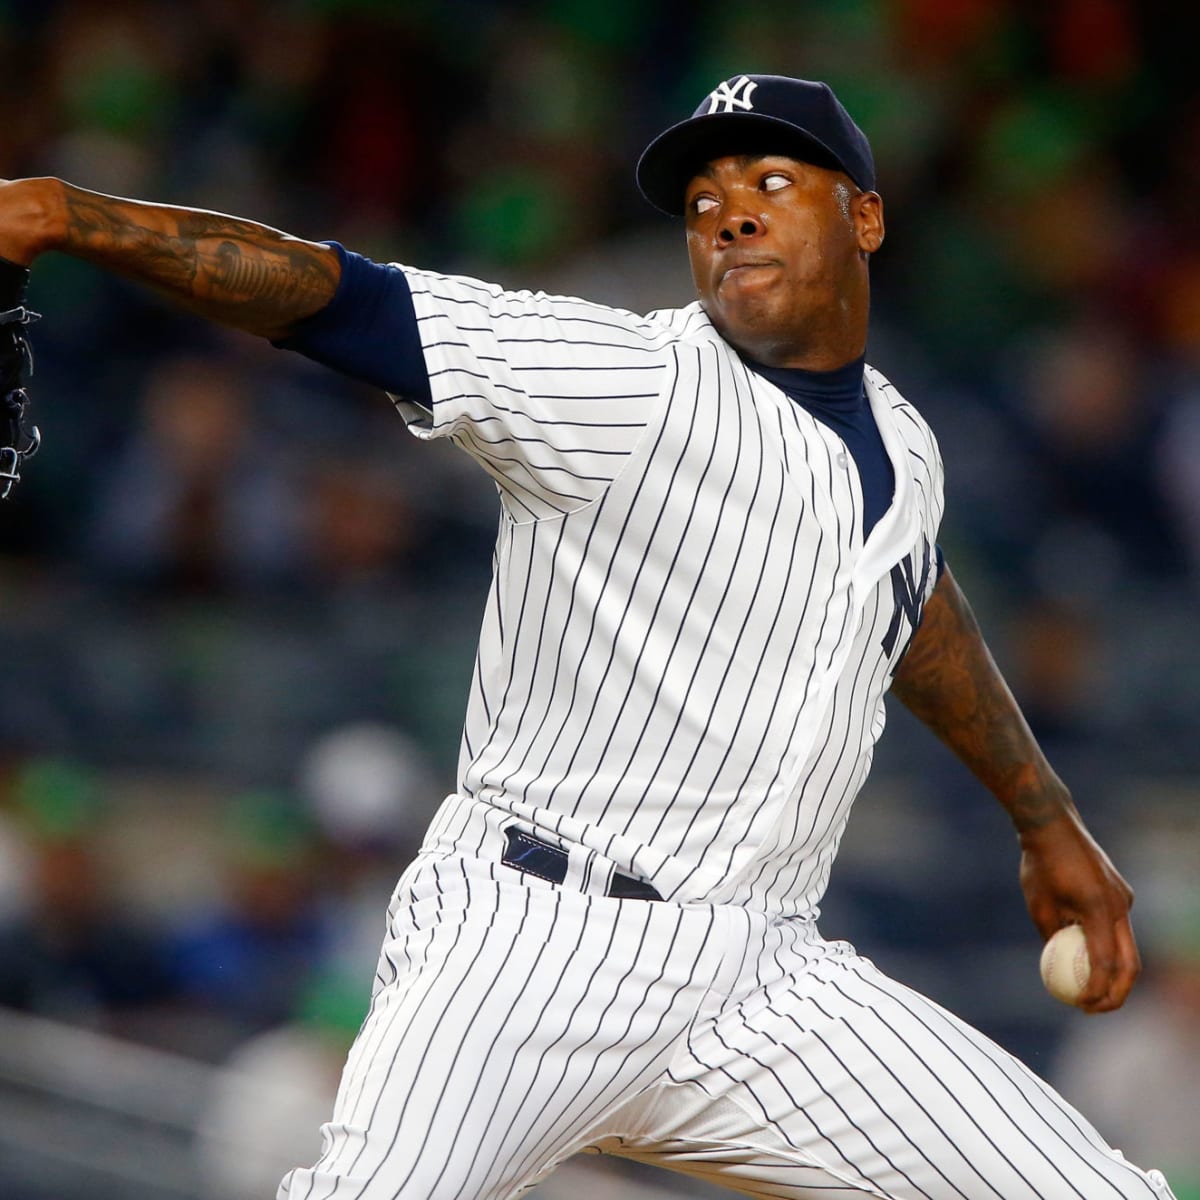 Details Are Emerging From The Aroldis Chapman Tattoo Story - The Spun: What's Trending In The Sports World Today